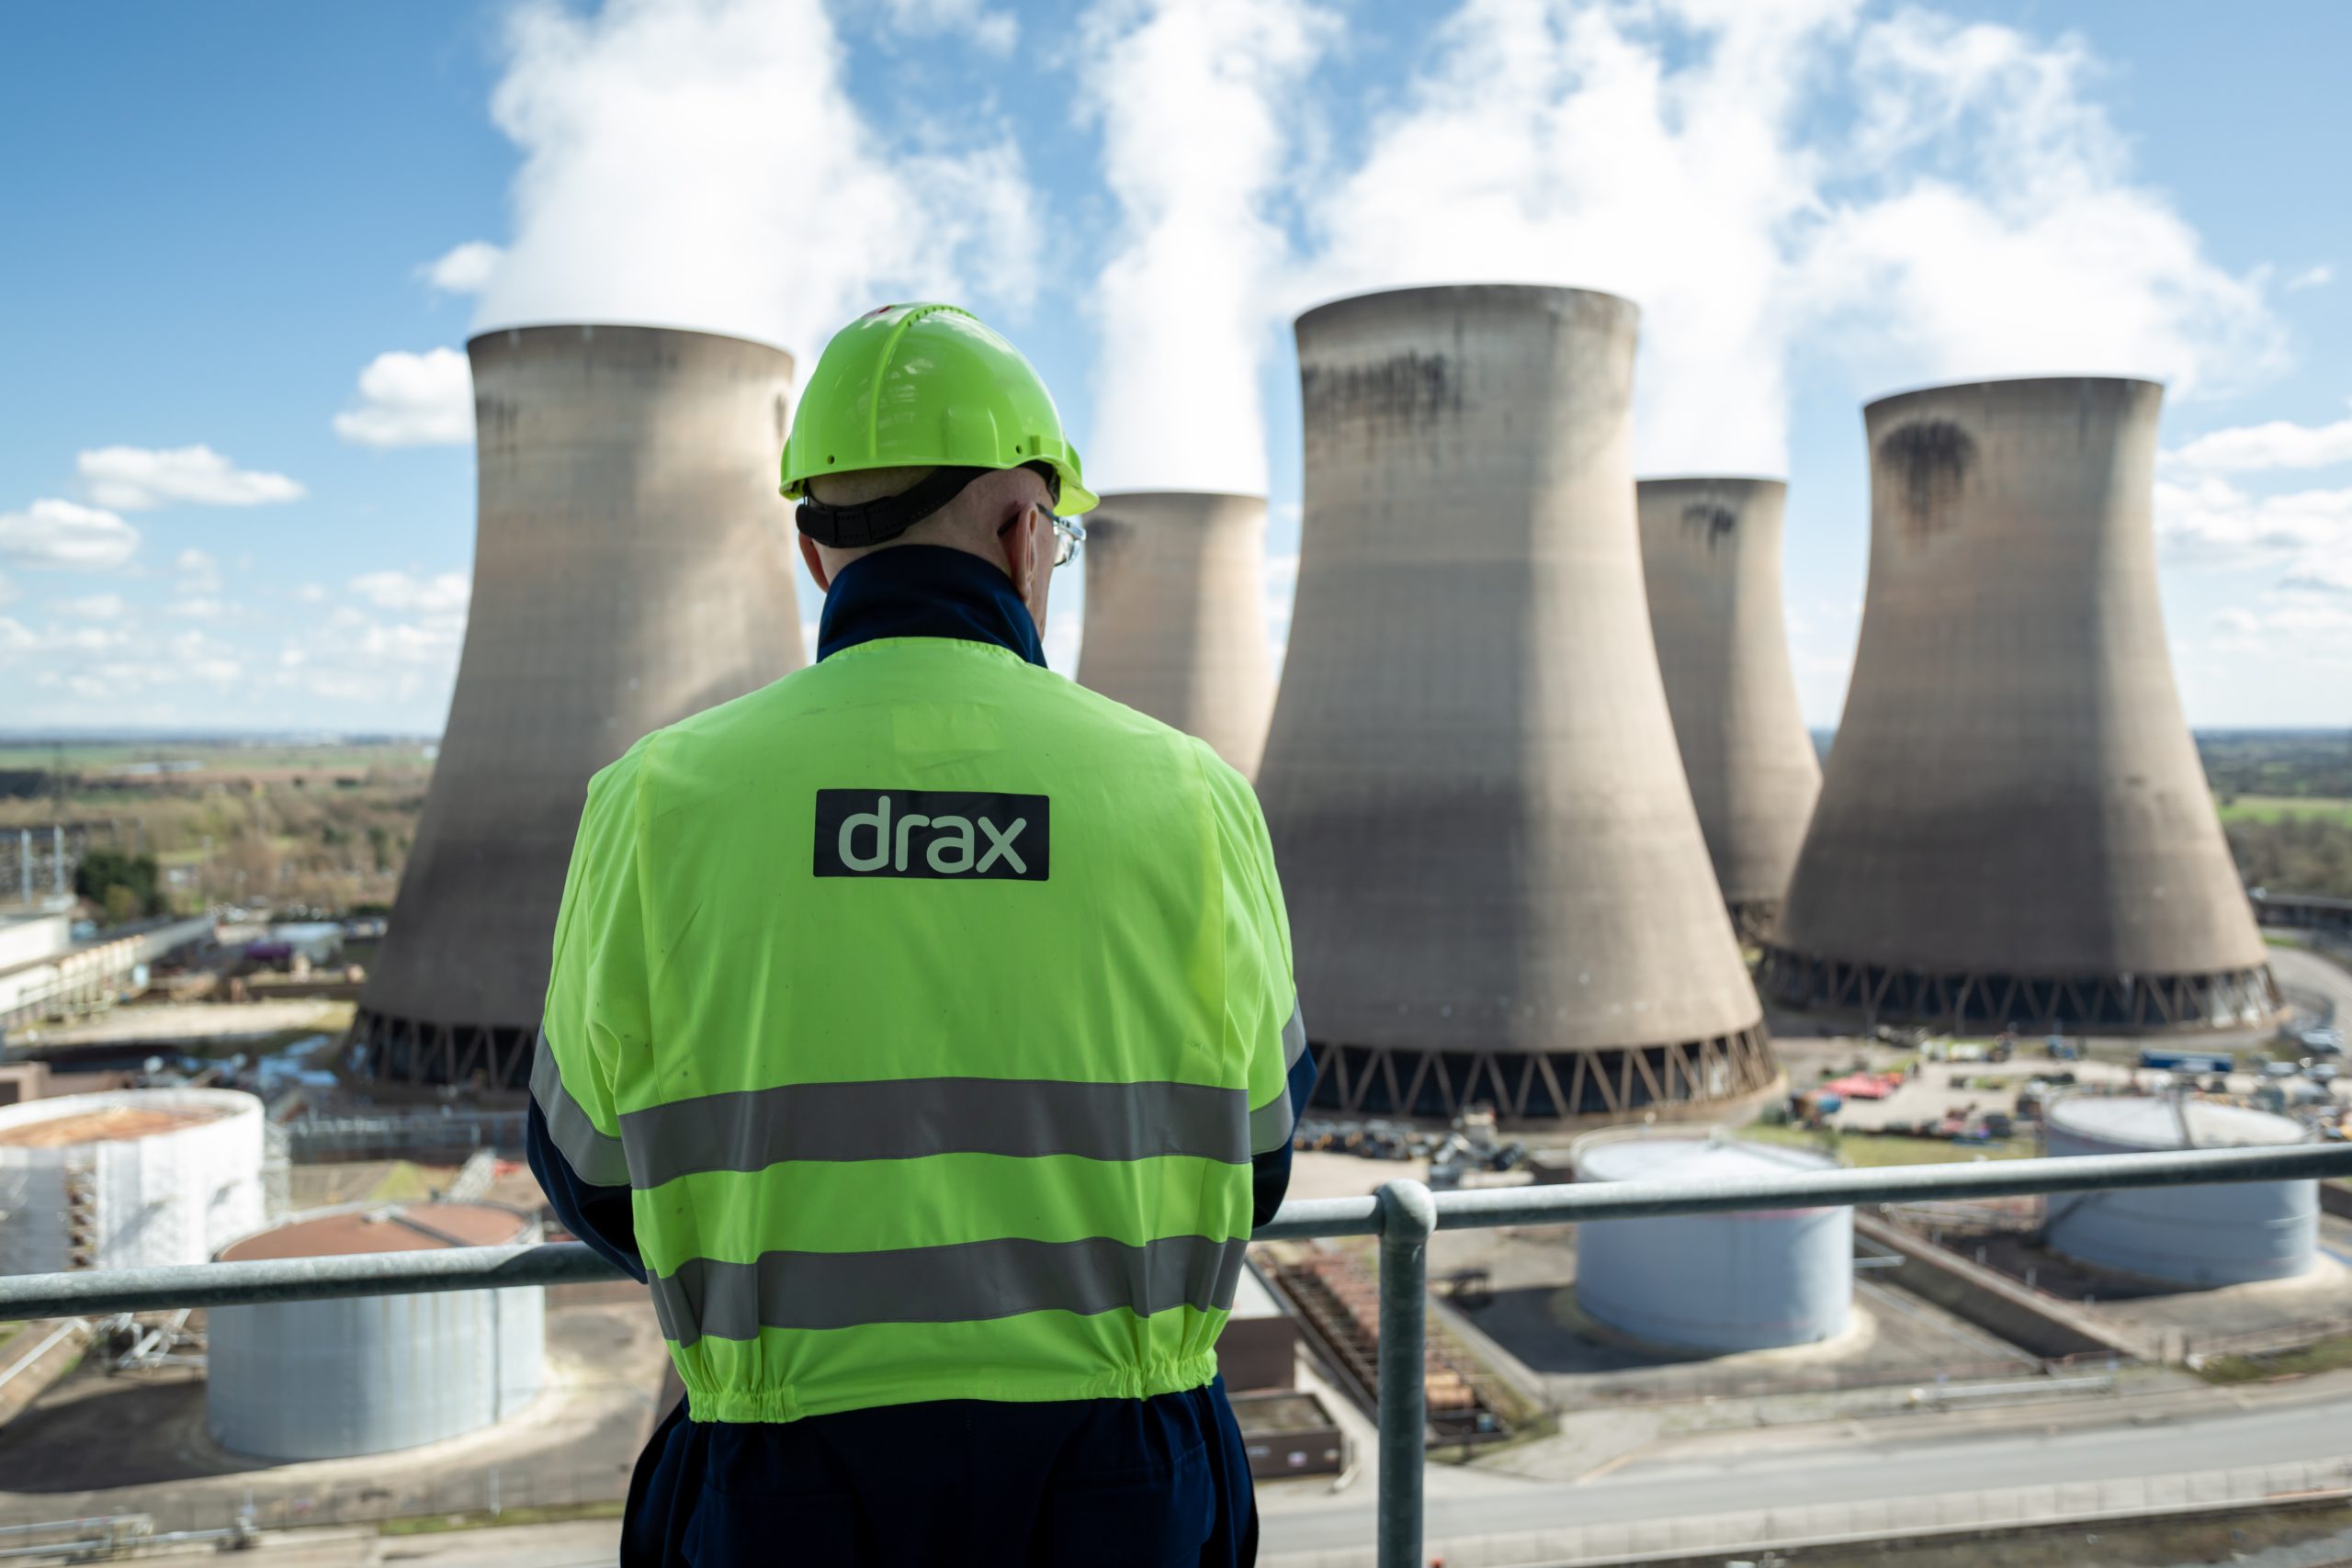 Drax Power Station cooling towers